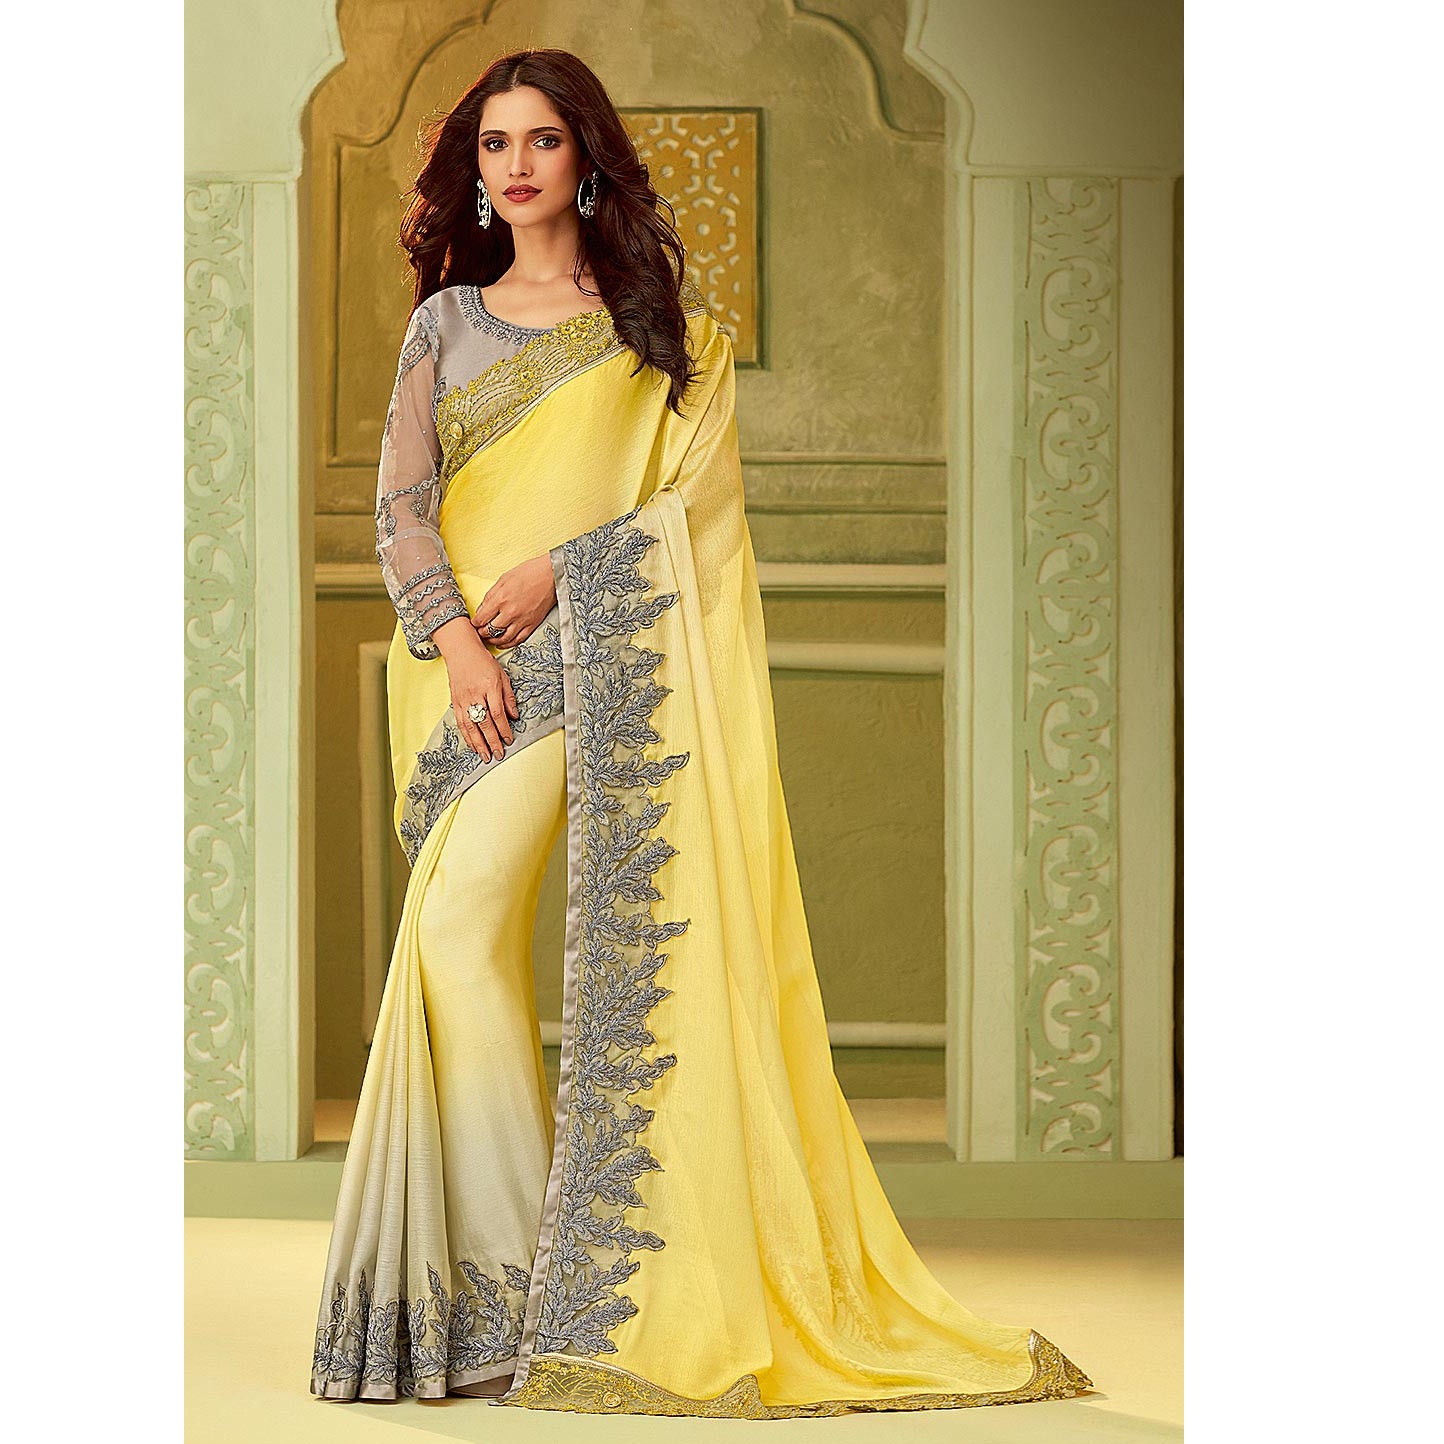 Traditional Designer Party Wear Yellow Satin Saree With Embroidery Border.  at Rs 1407.00, Fancy Sarees